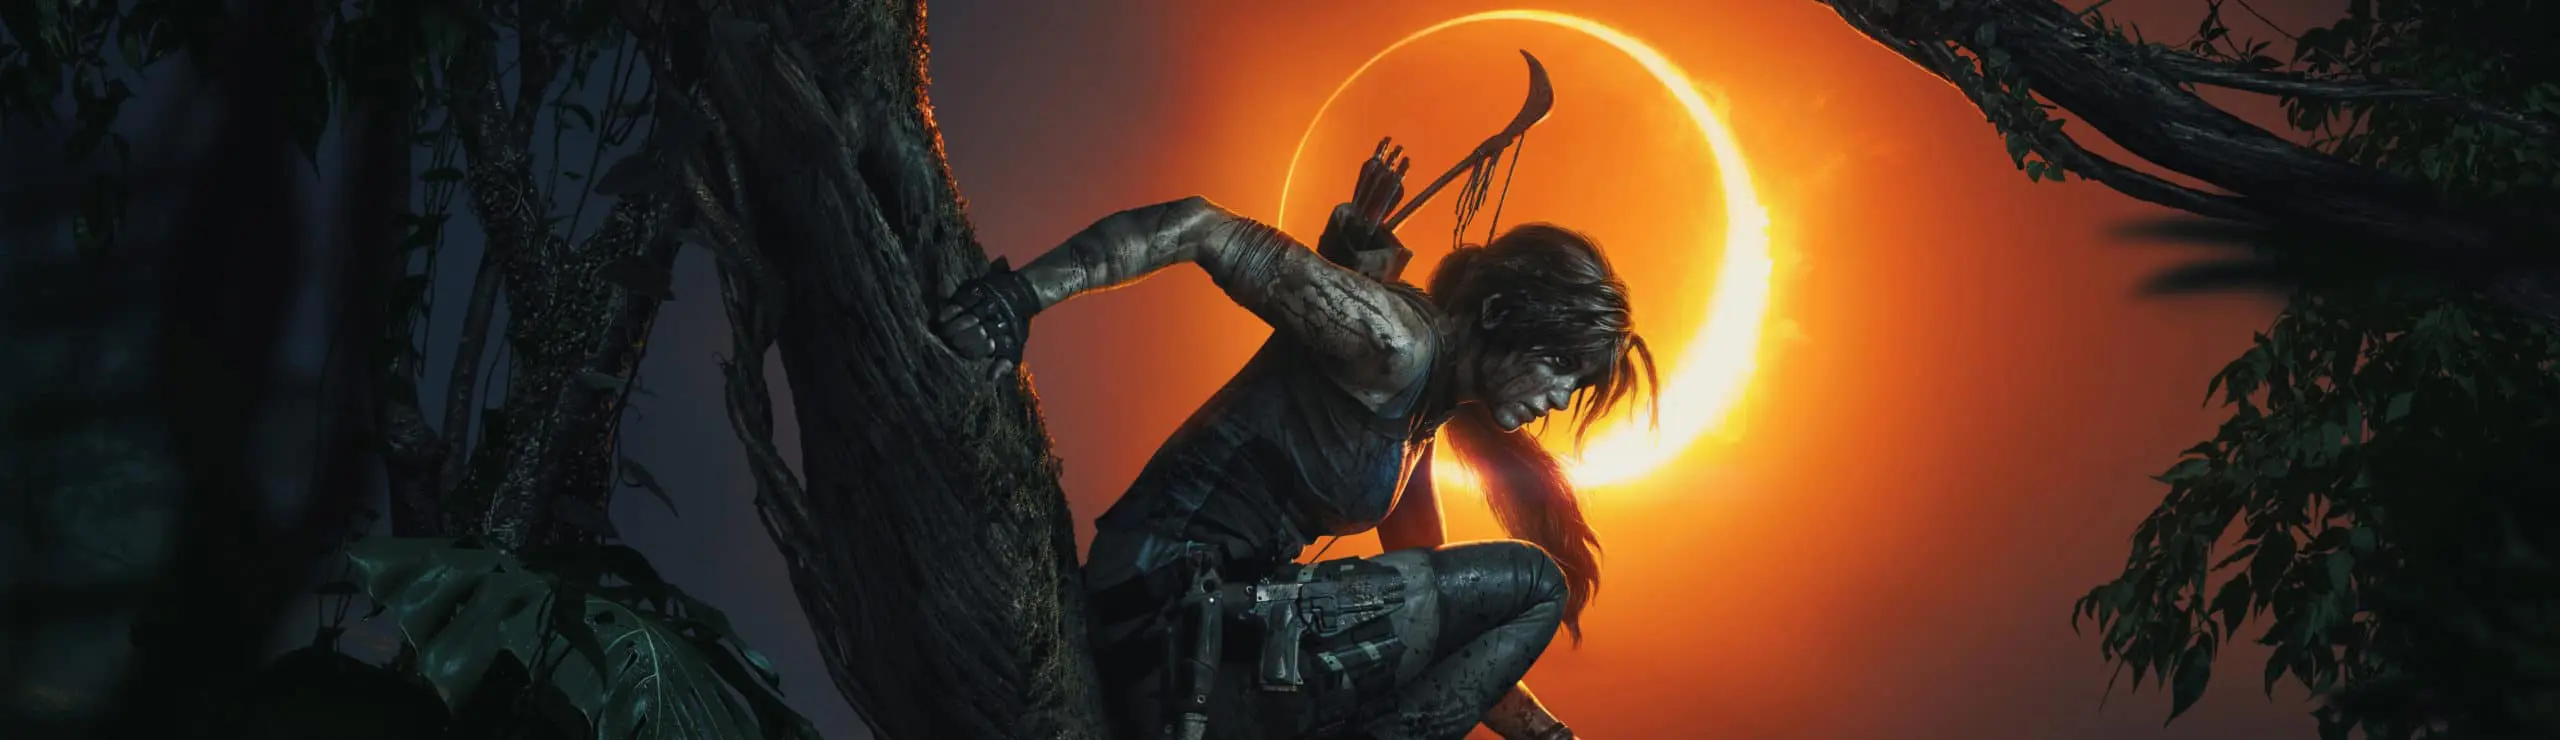 EIDOS MONTRÉAL’S SHADOW OF THE TOMB RAIDER LAUNCHED THIS MONTH VIRTUOS TEAM MAKES MAJOR CO-DEVELOPMENT CONTRIBUTION